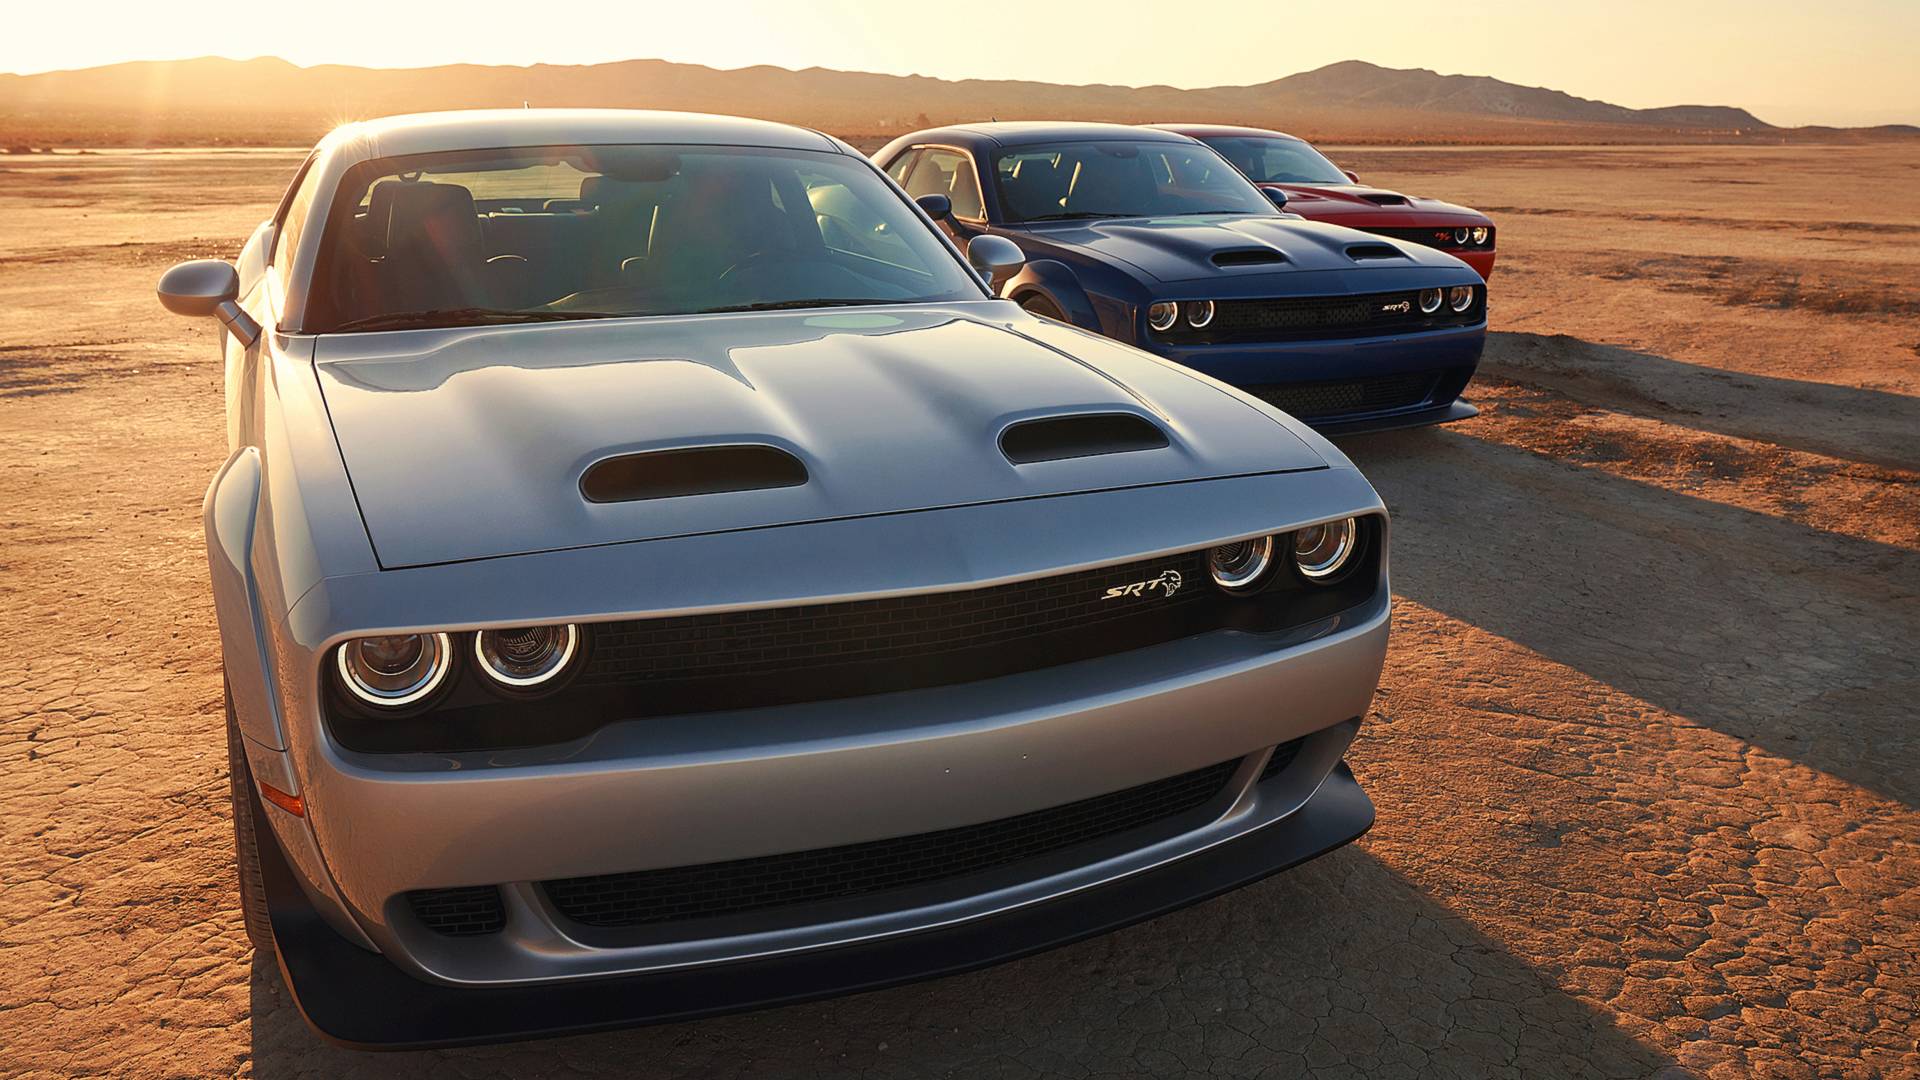 2019 Dodge Challenger SRT Hellcat Redeye Pricing Announced, Starts At